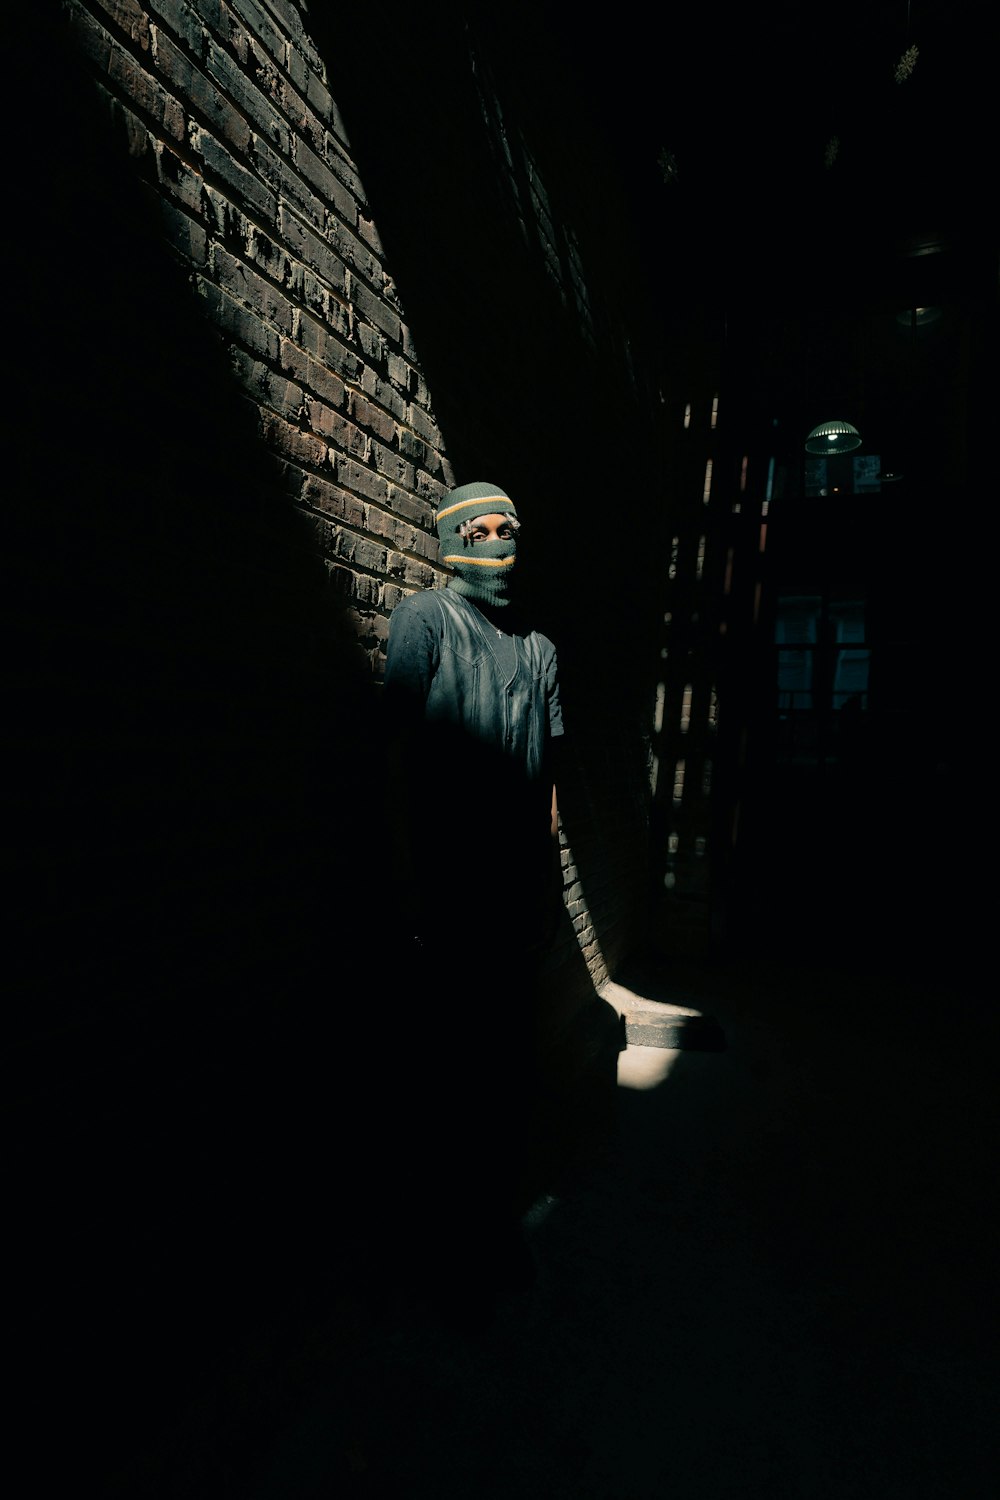 a person with a mask on standing next to a brick wall